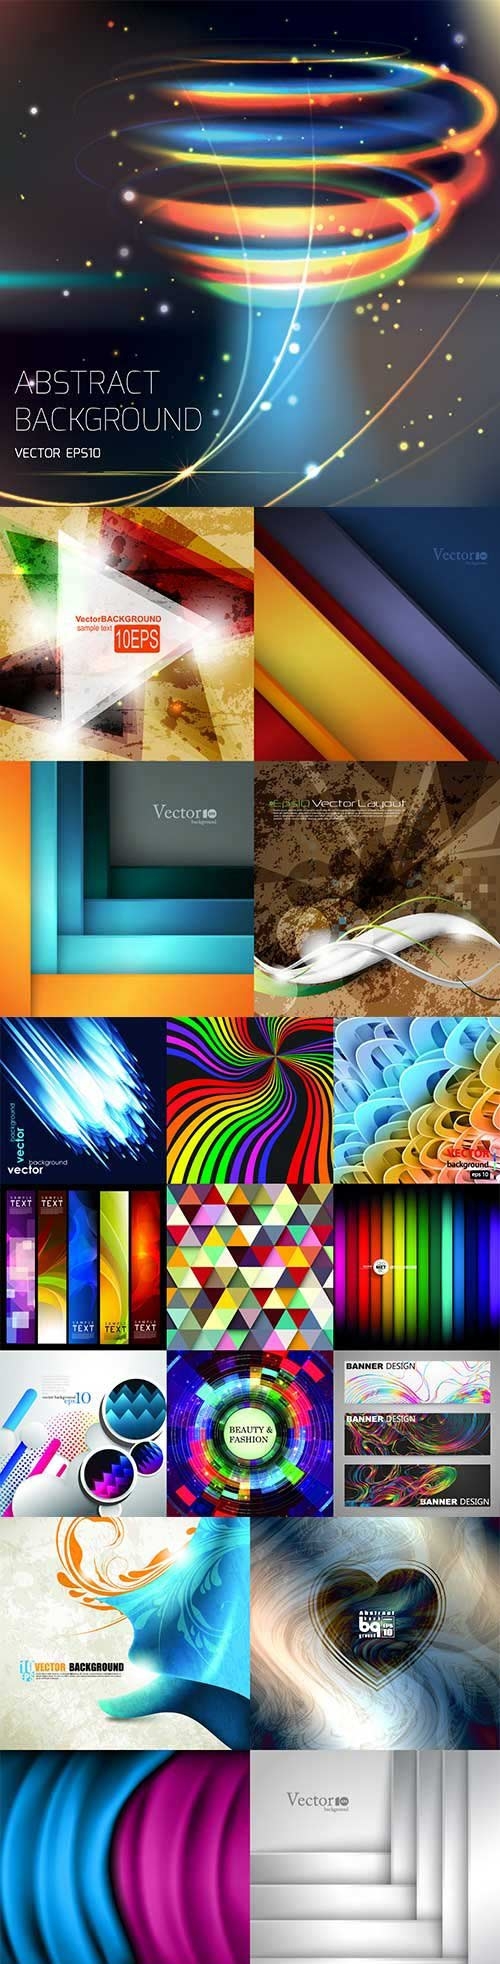 Bright colorful abstract backgrounds vector - 84